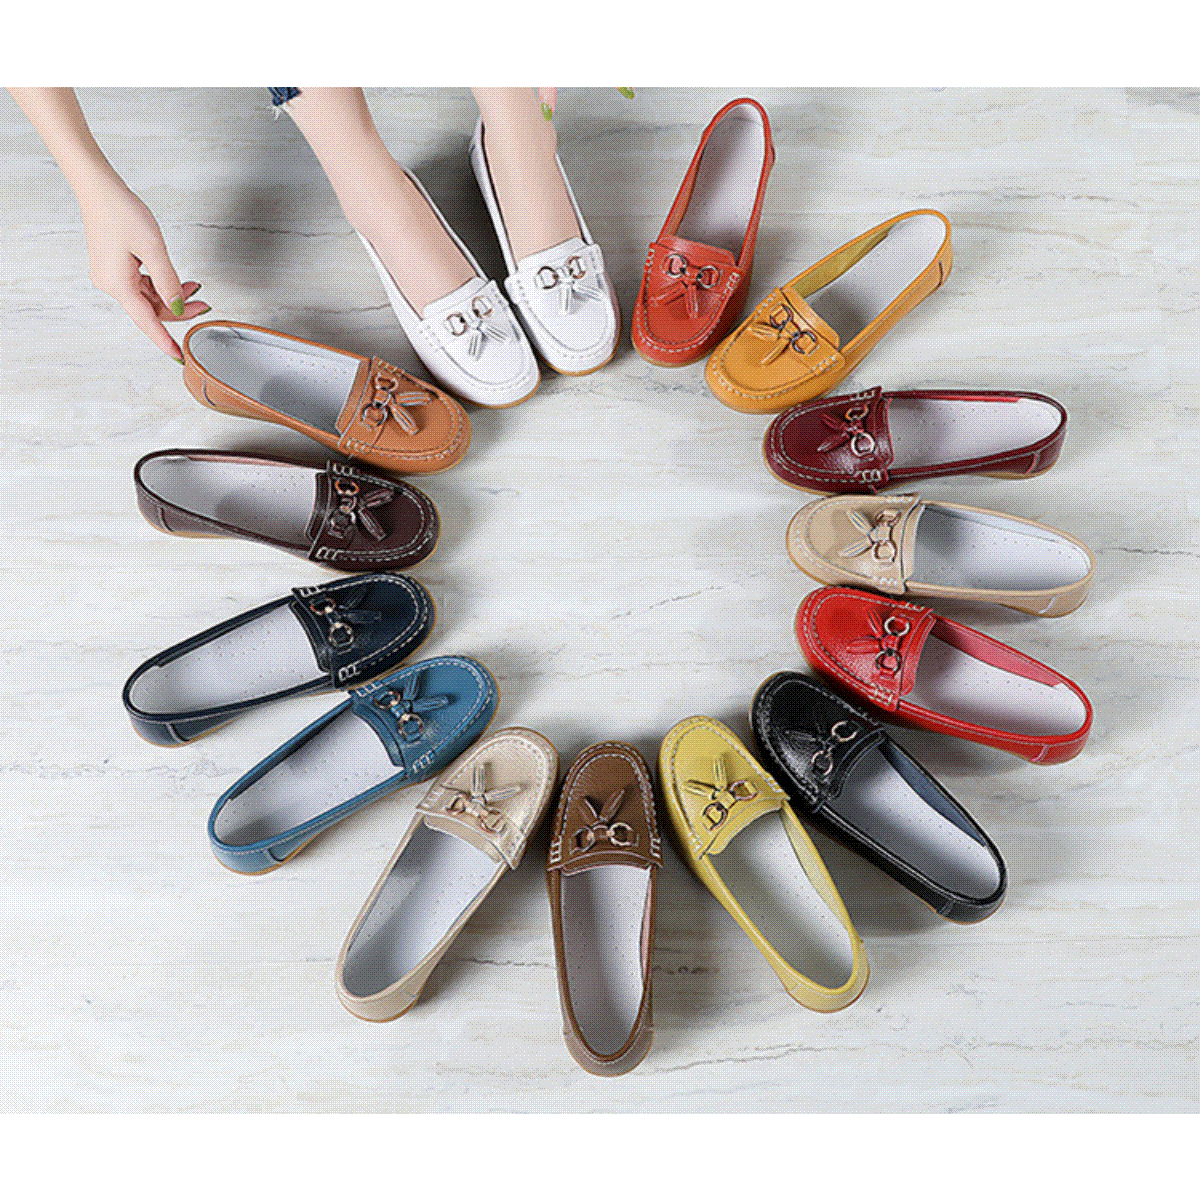 2023 Autumn New Loafers Casual Shoes